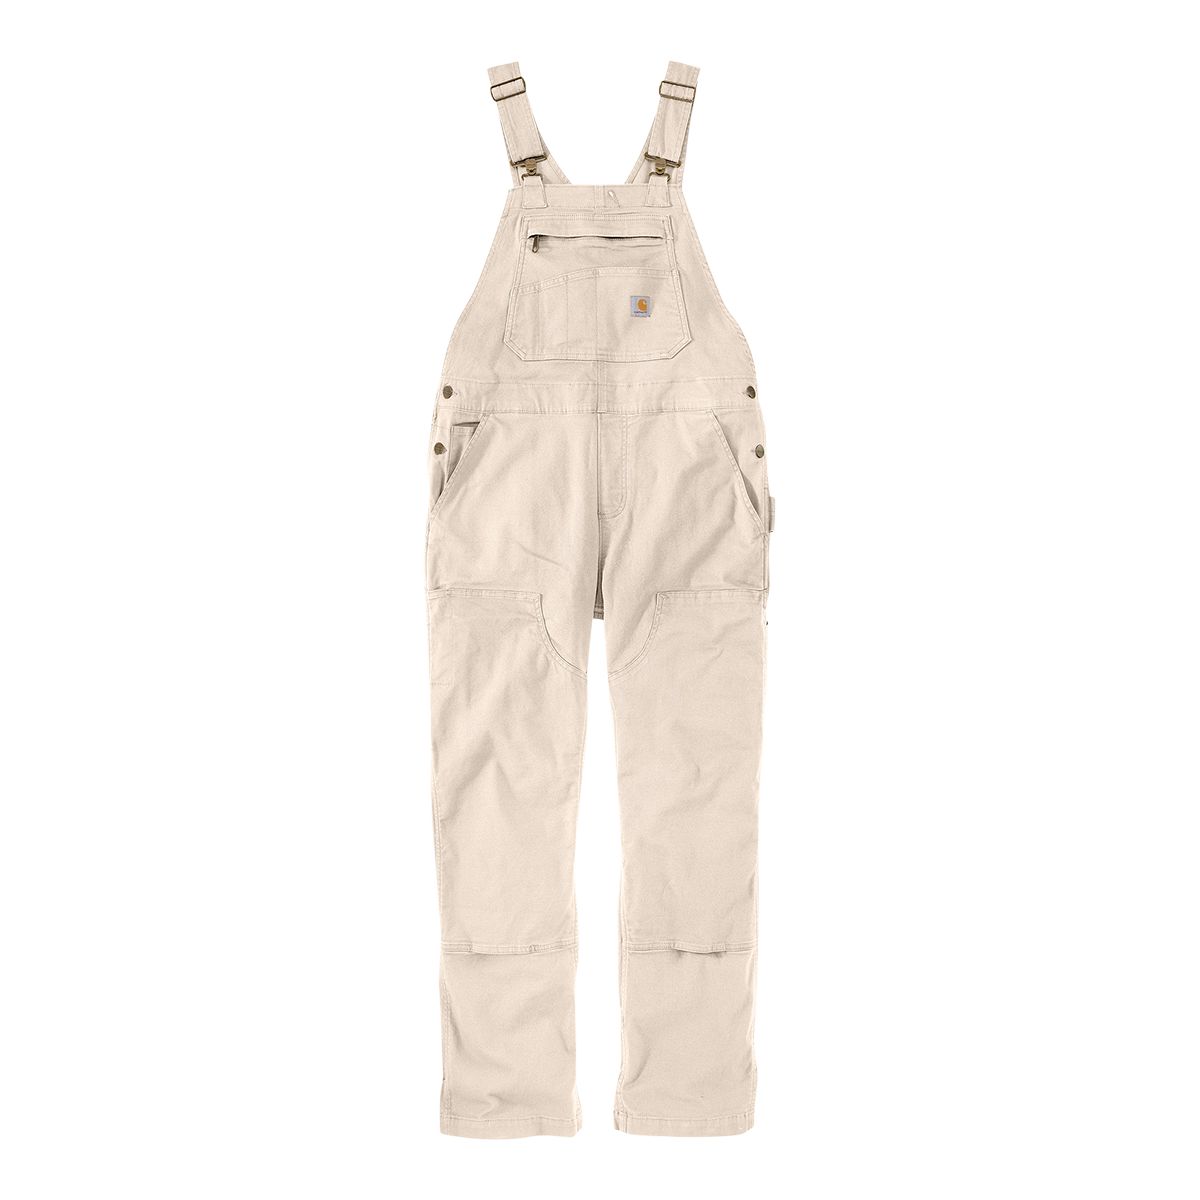 Image of Carhartt Women's Loose Fit Canvas Bib Overalll Pants